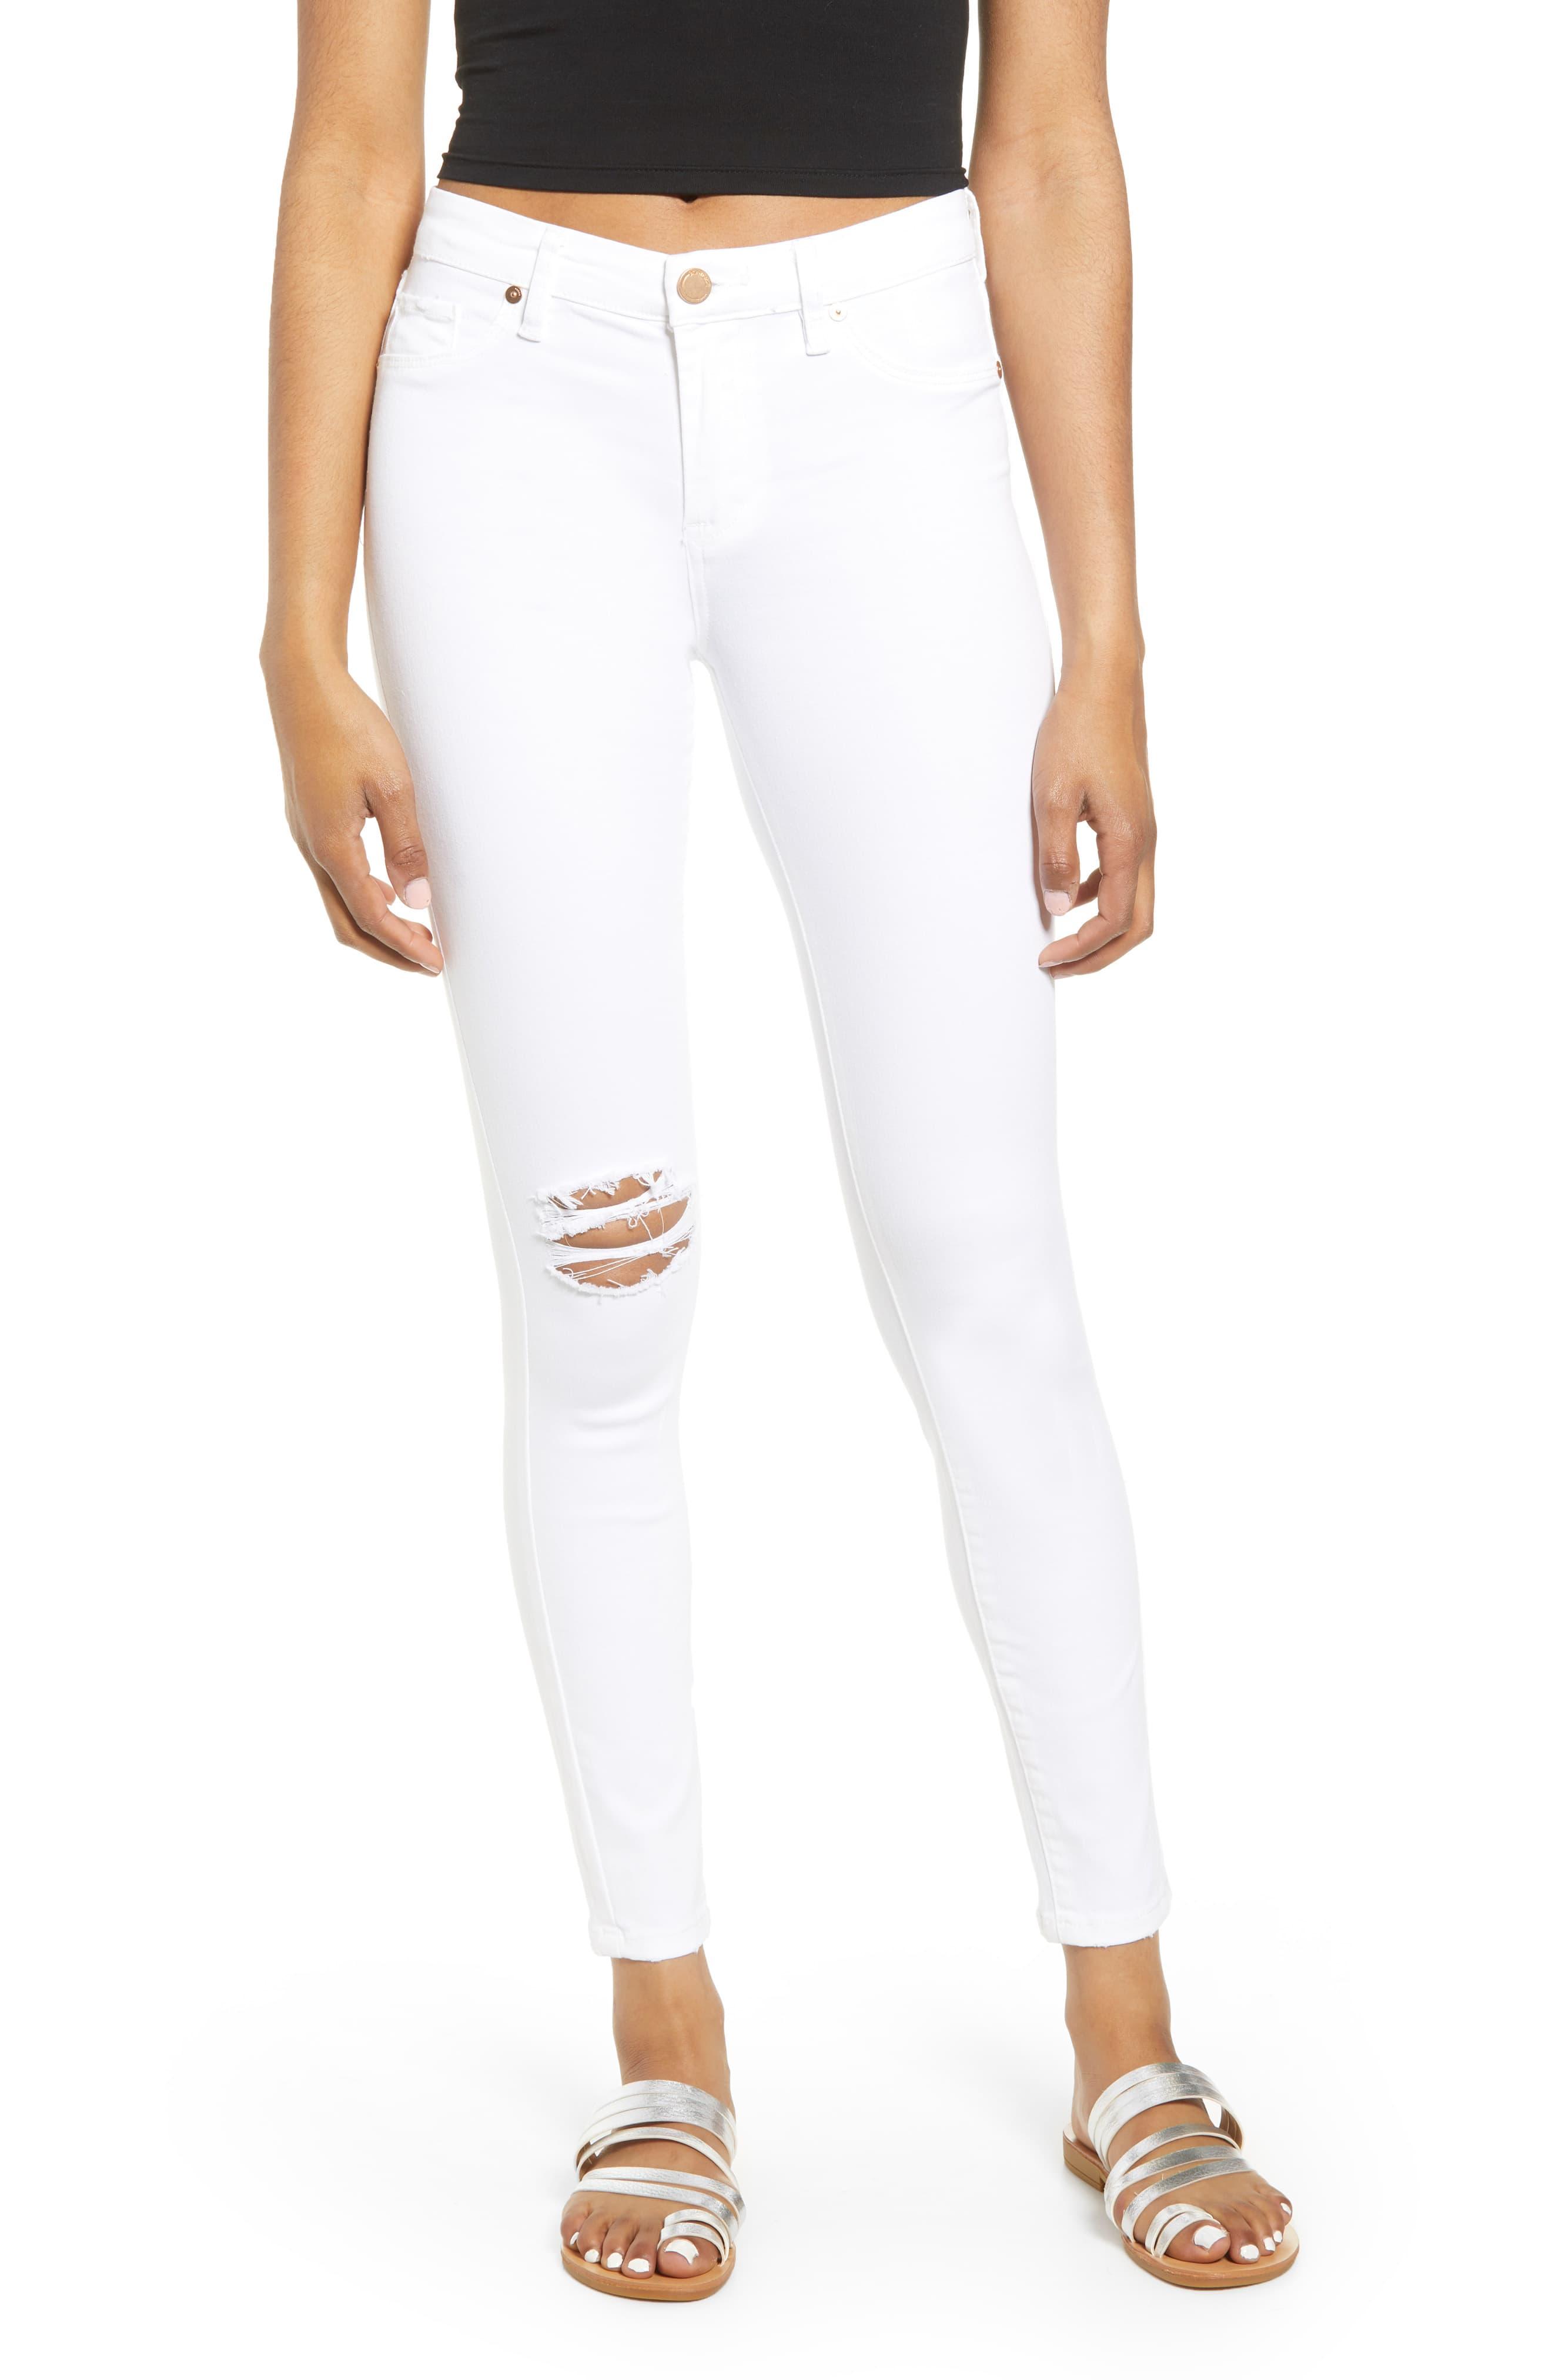 Blank NYC Denim Ripped Jeggings in White - Lyst